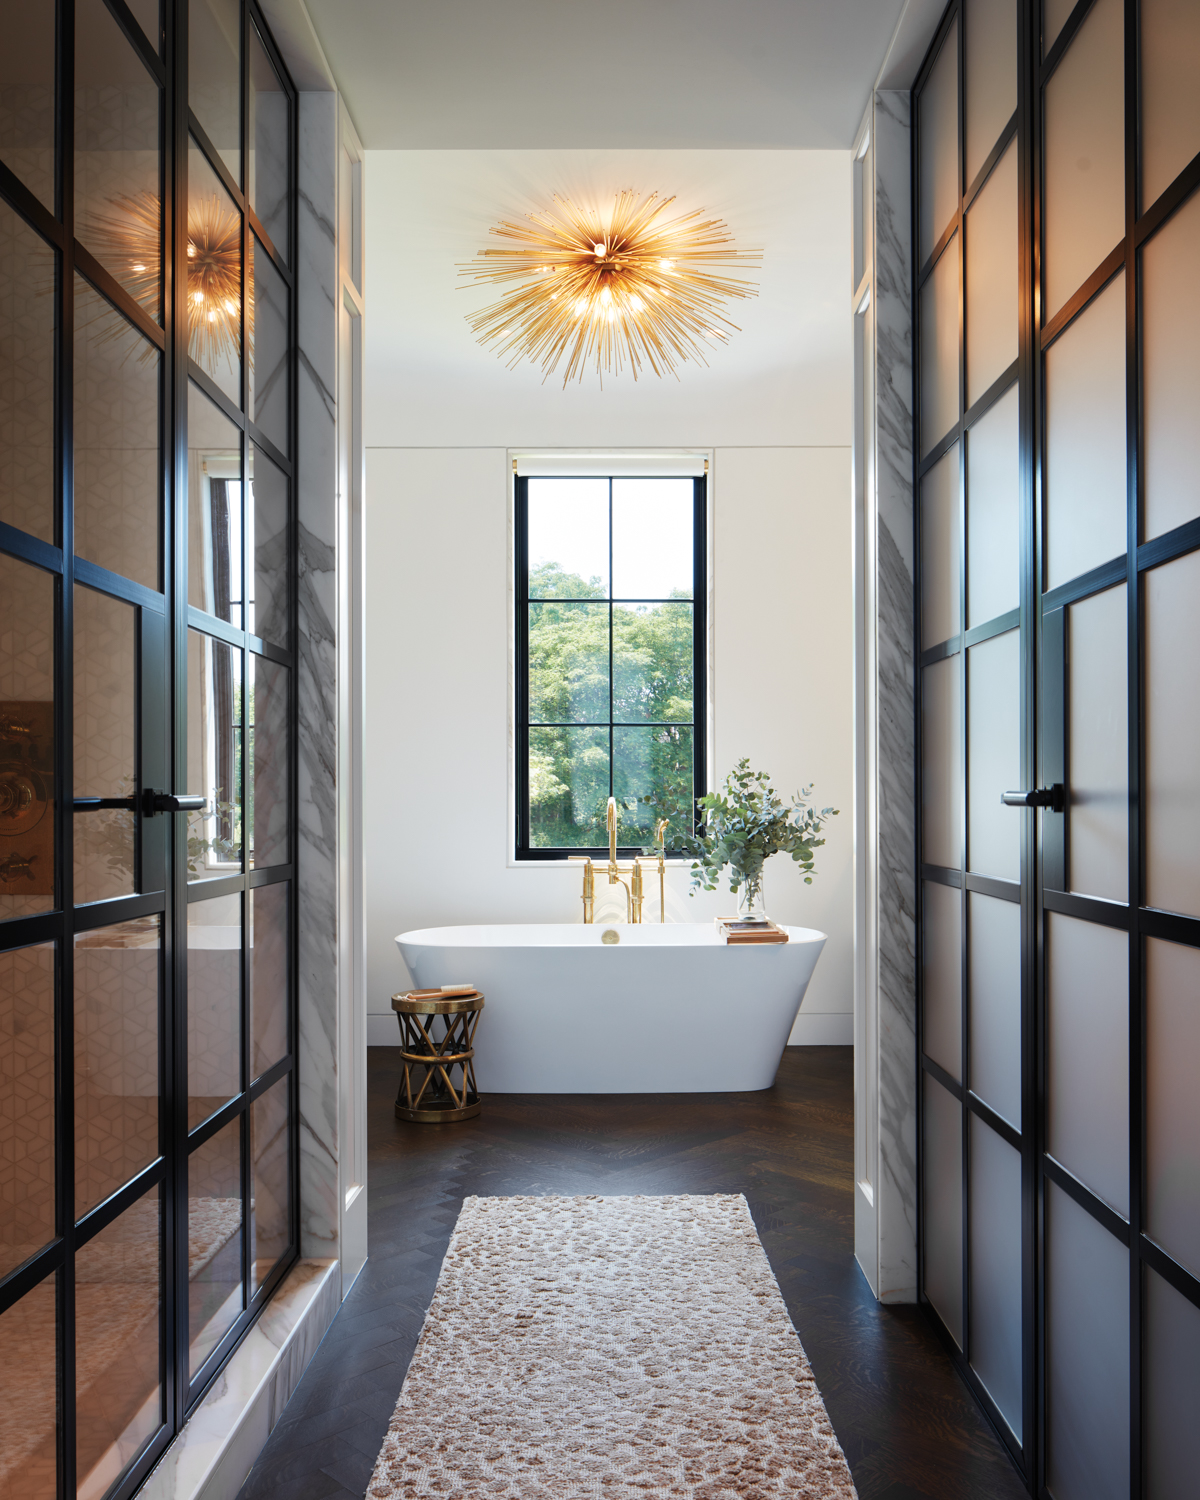 steel-and-glass closet doors line the...